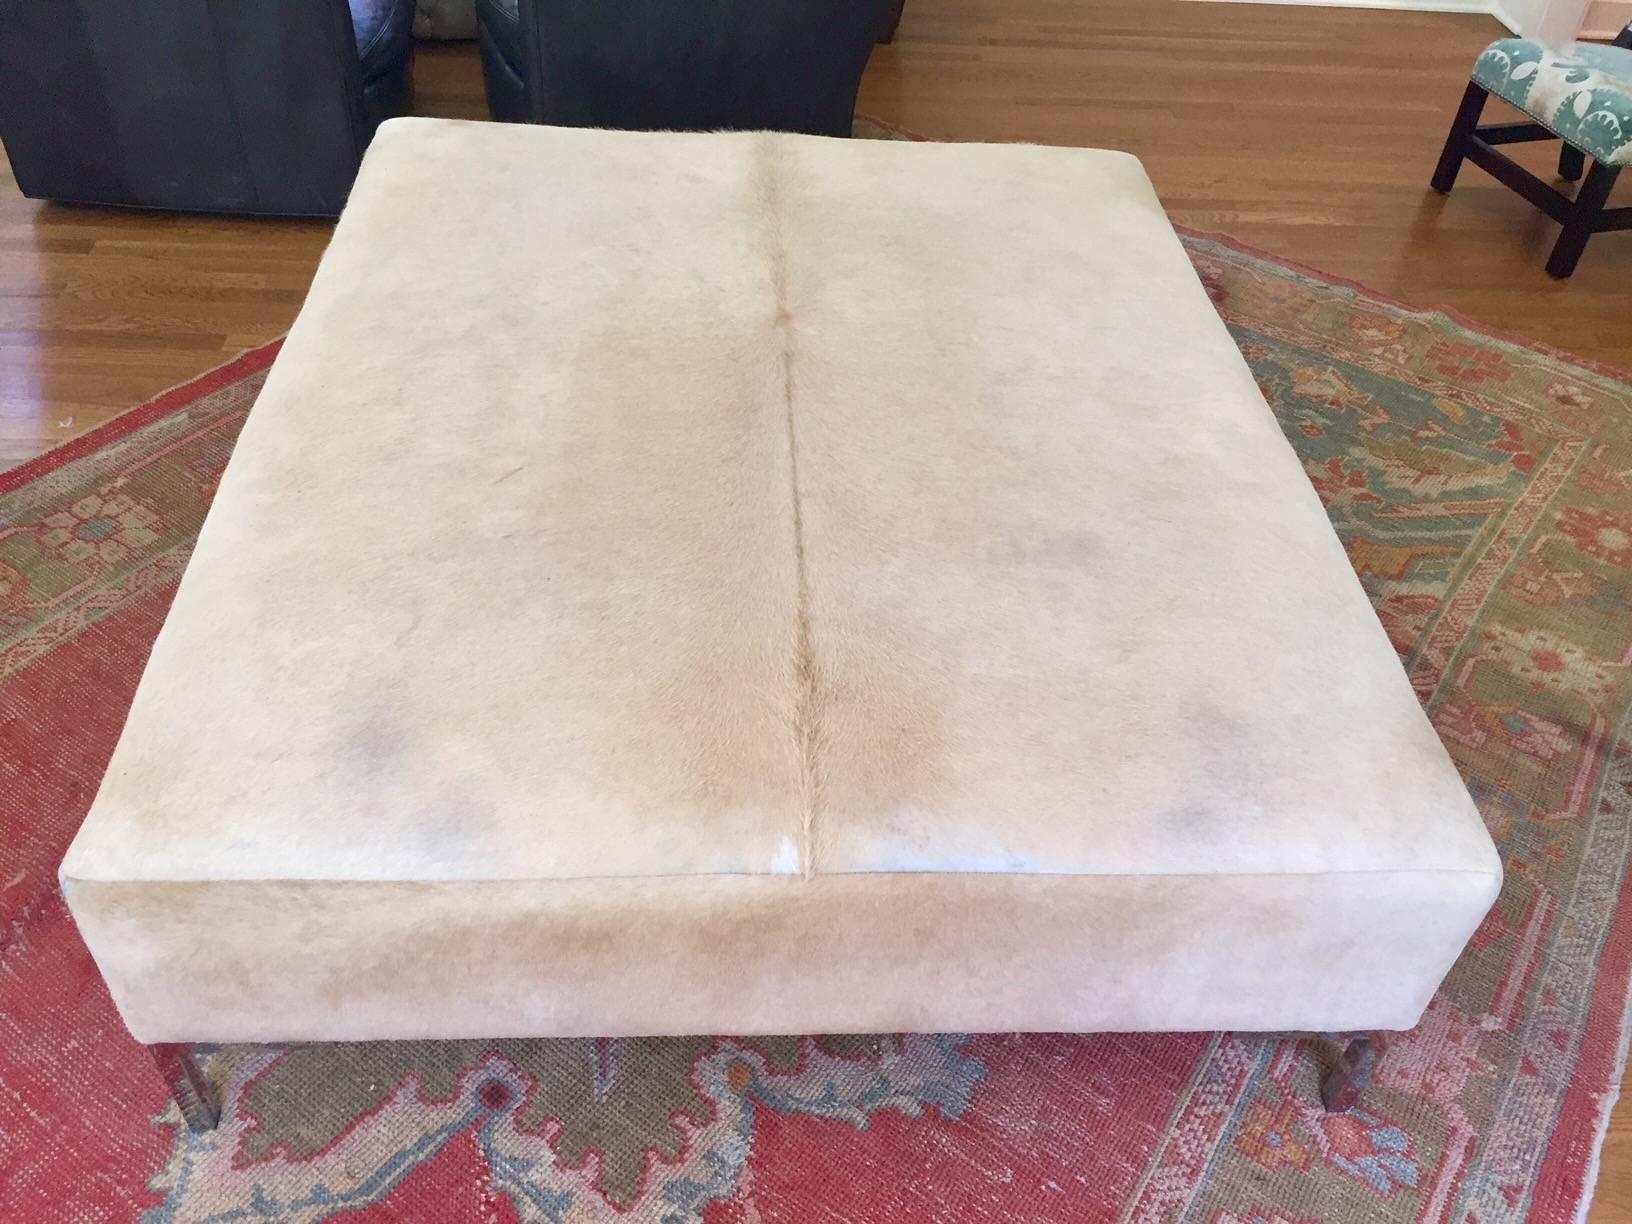 Natural tan cow hide with solid stainless modern legs.
Firm enough for seating or to be used for serving food/drinks.
Some wear along edge seems. 
Plantation custom made furniture. Purchase in 2012. 
